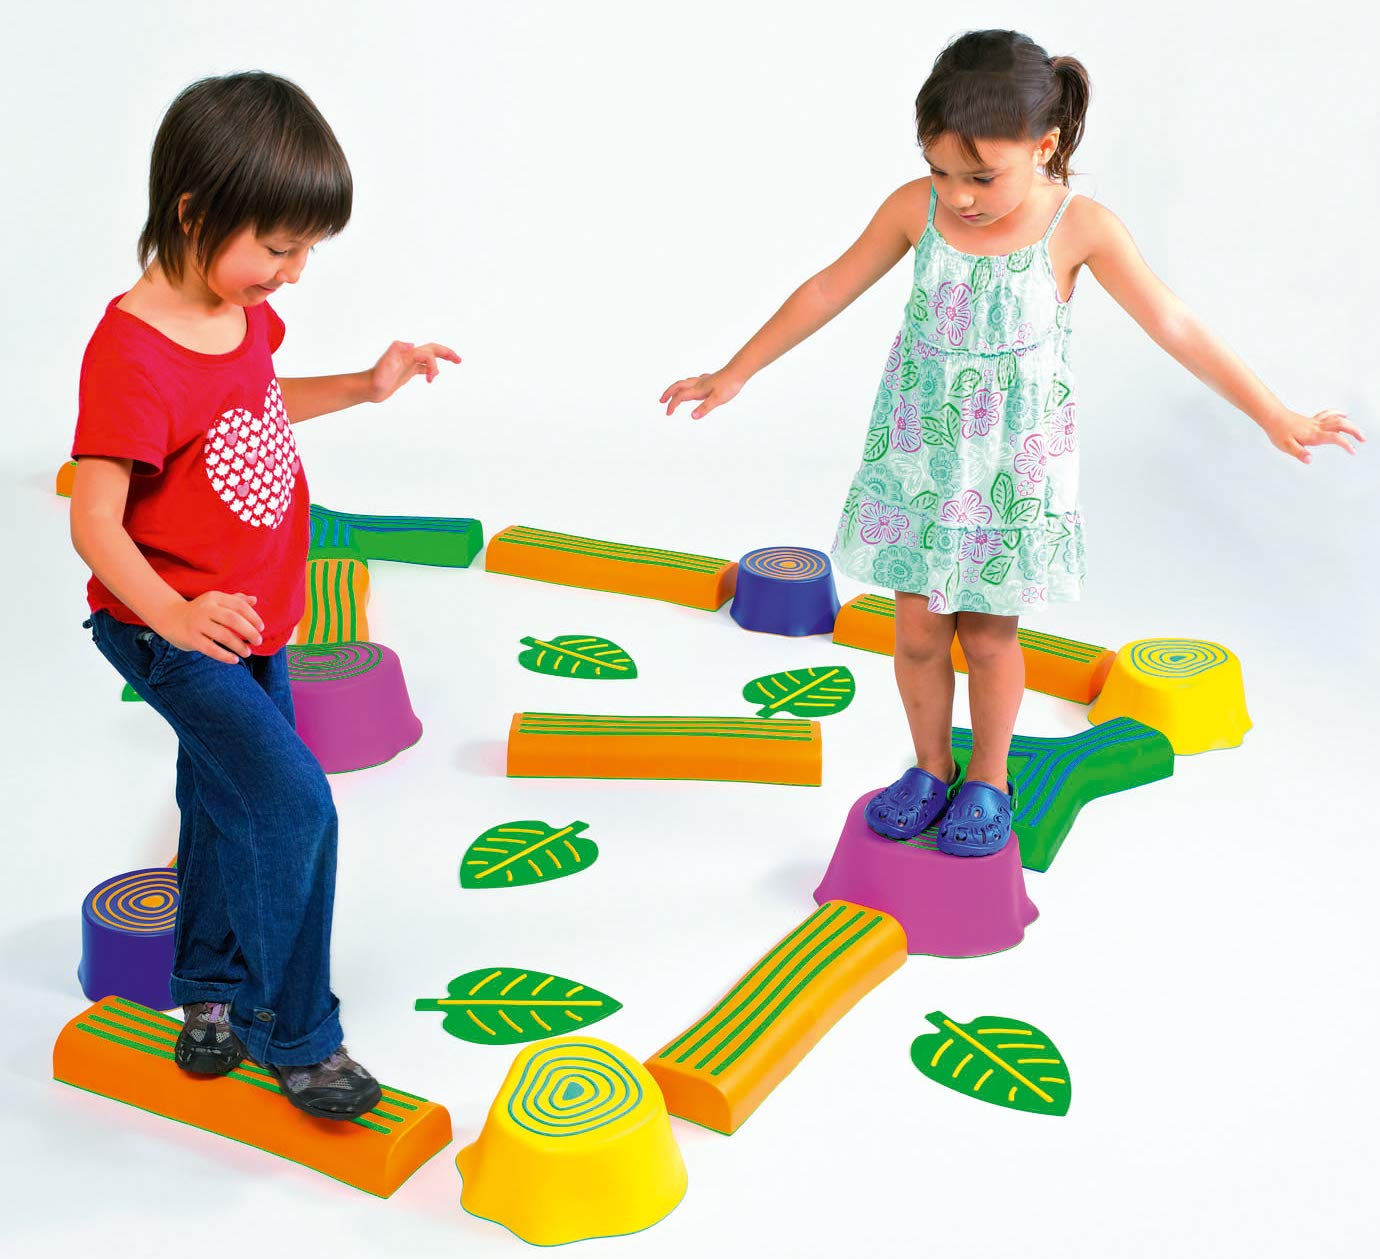 Woodland Obstacle Play Course